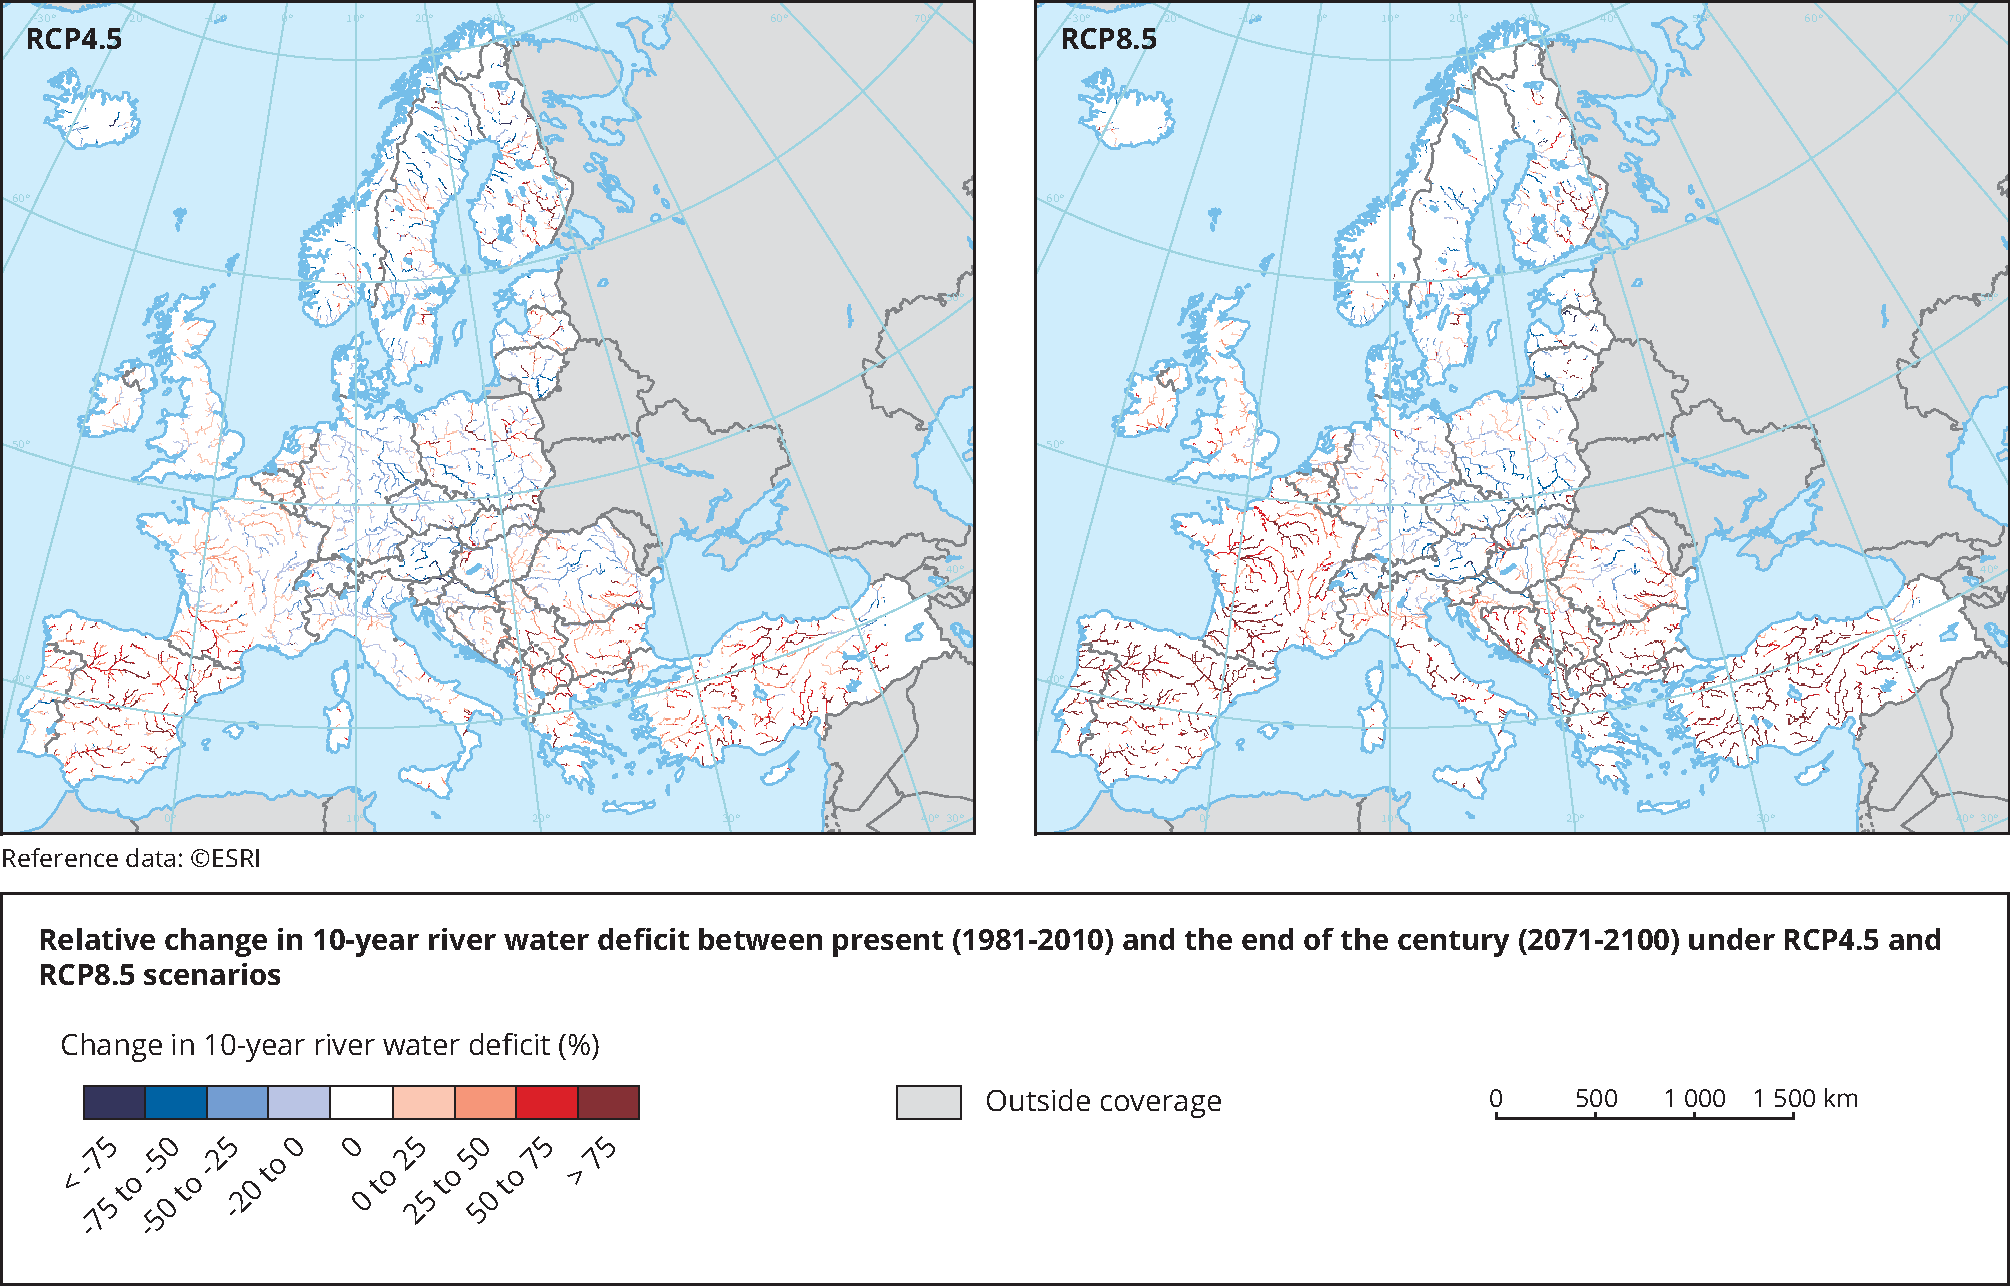 Projected change in 10-year river water deficit between the present (1981-2010) and the end of the 21st century (2071-2100) in Europe, under two emissions scenarios